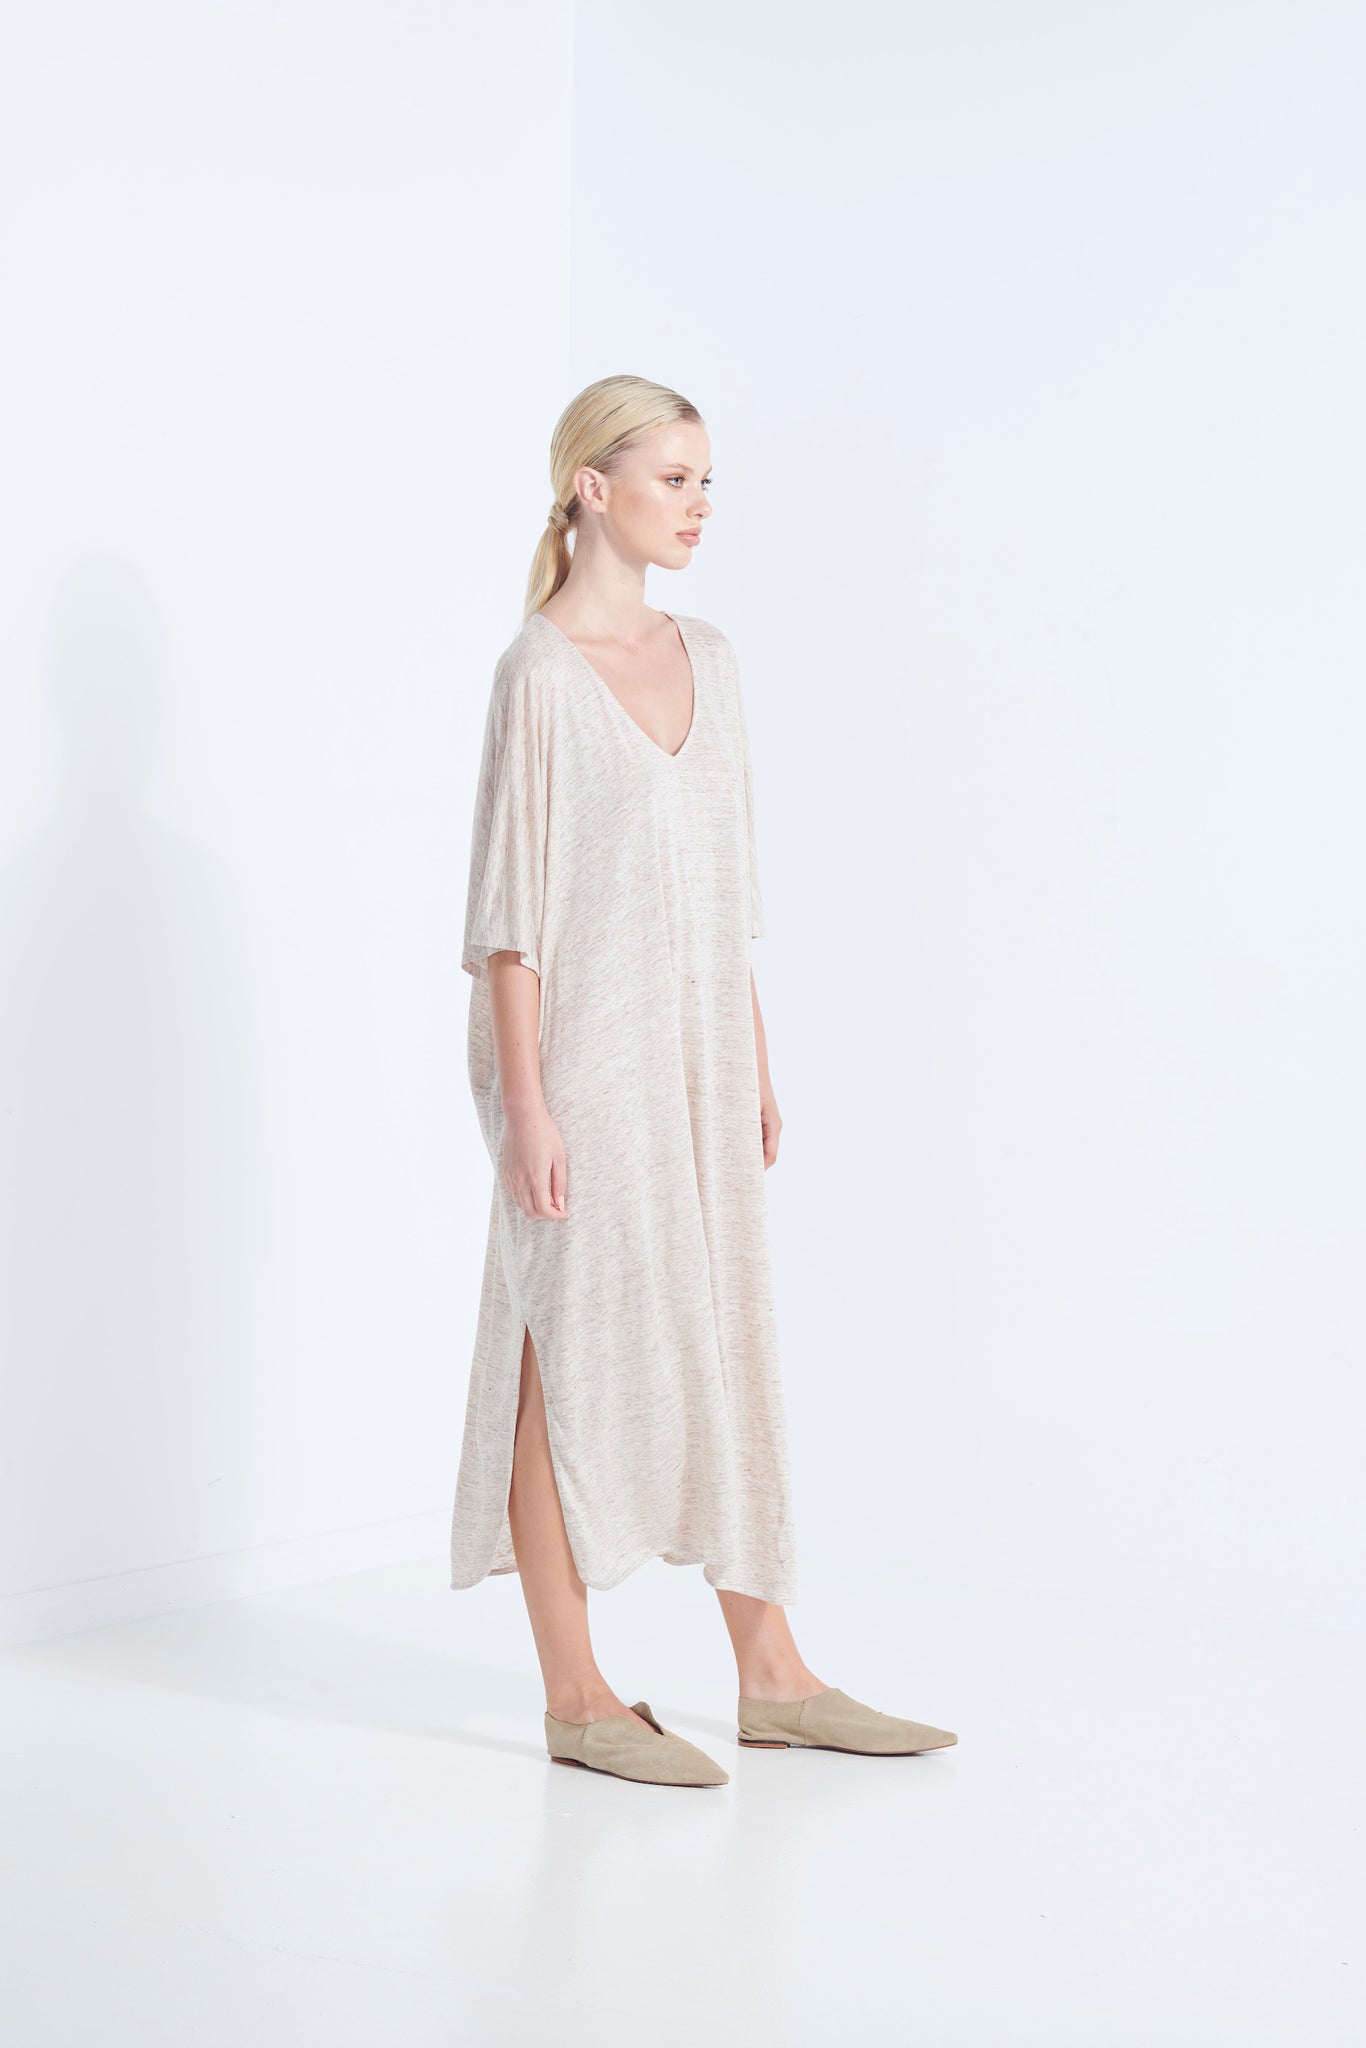 ZEUS DRESS PURE LINEN NATURAL YARN IN WICKER WITH SIDE HEM SCOOP AND SELF FABRIC TIE  SIDE VIEW 